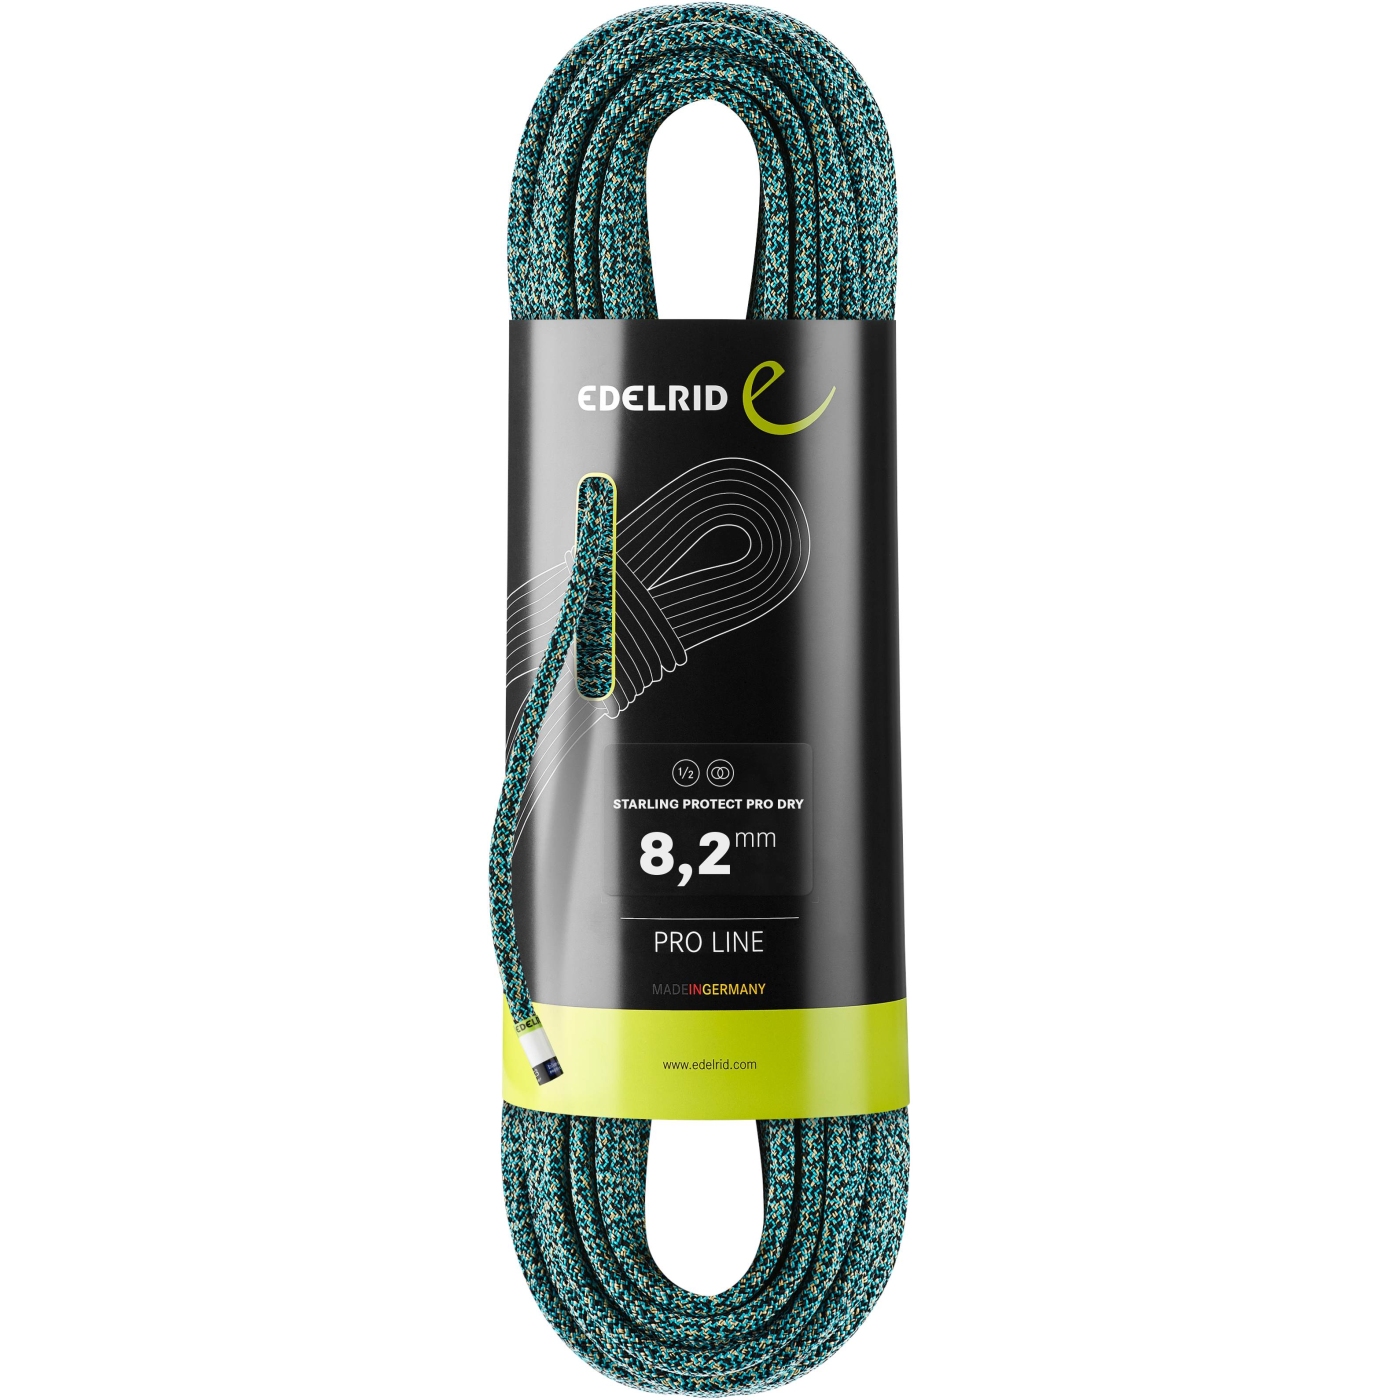 Picture of Edelrid Starling Protect Pro Dry 8,2mm Rope - 60m - icemint-night